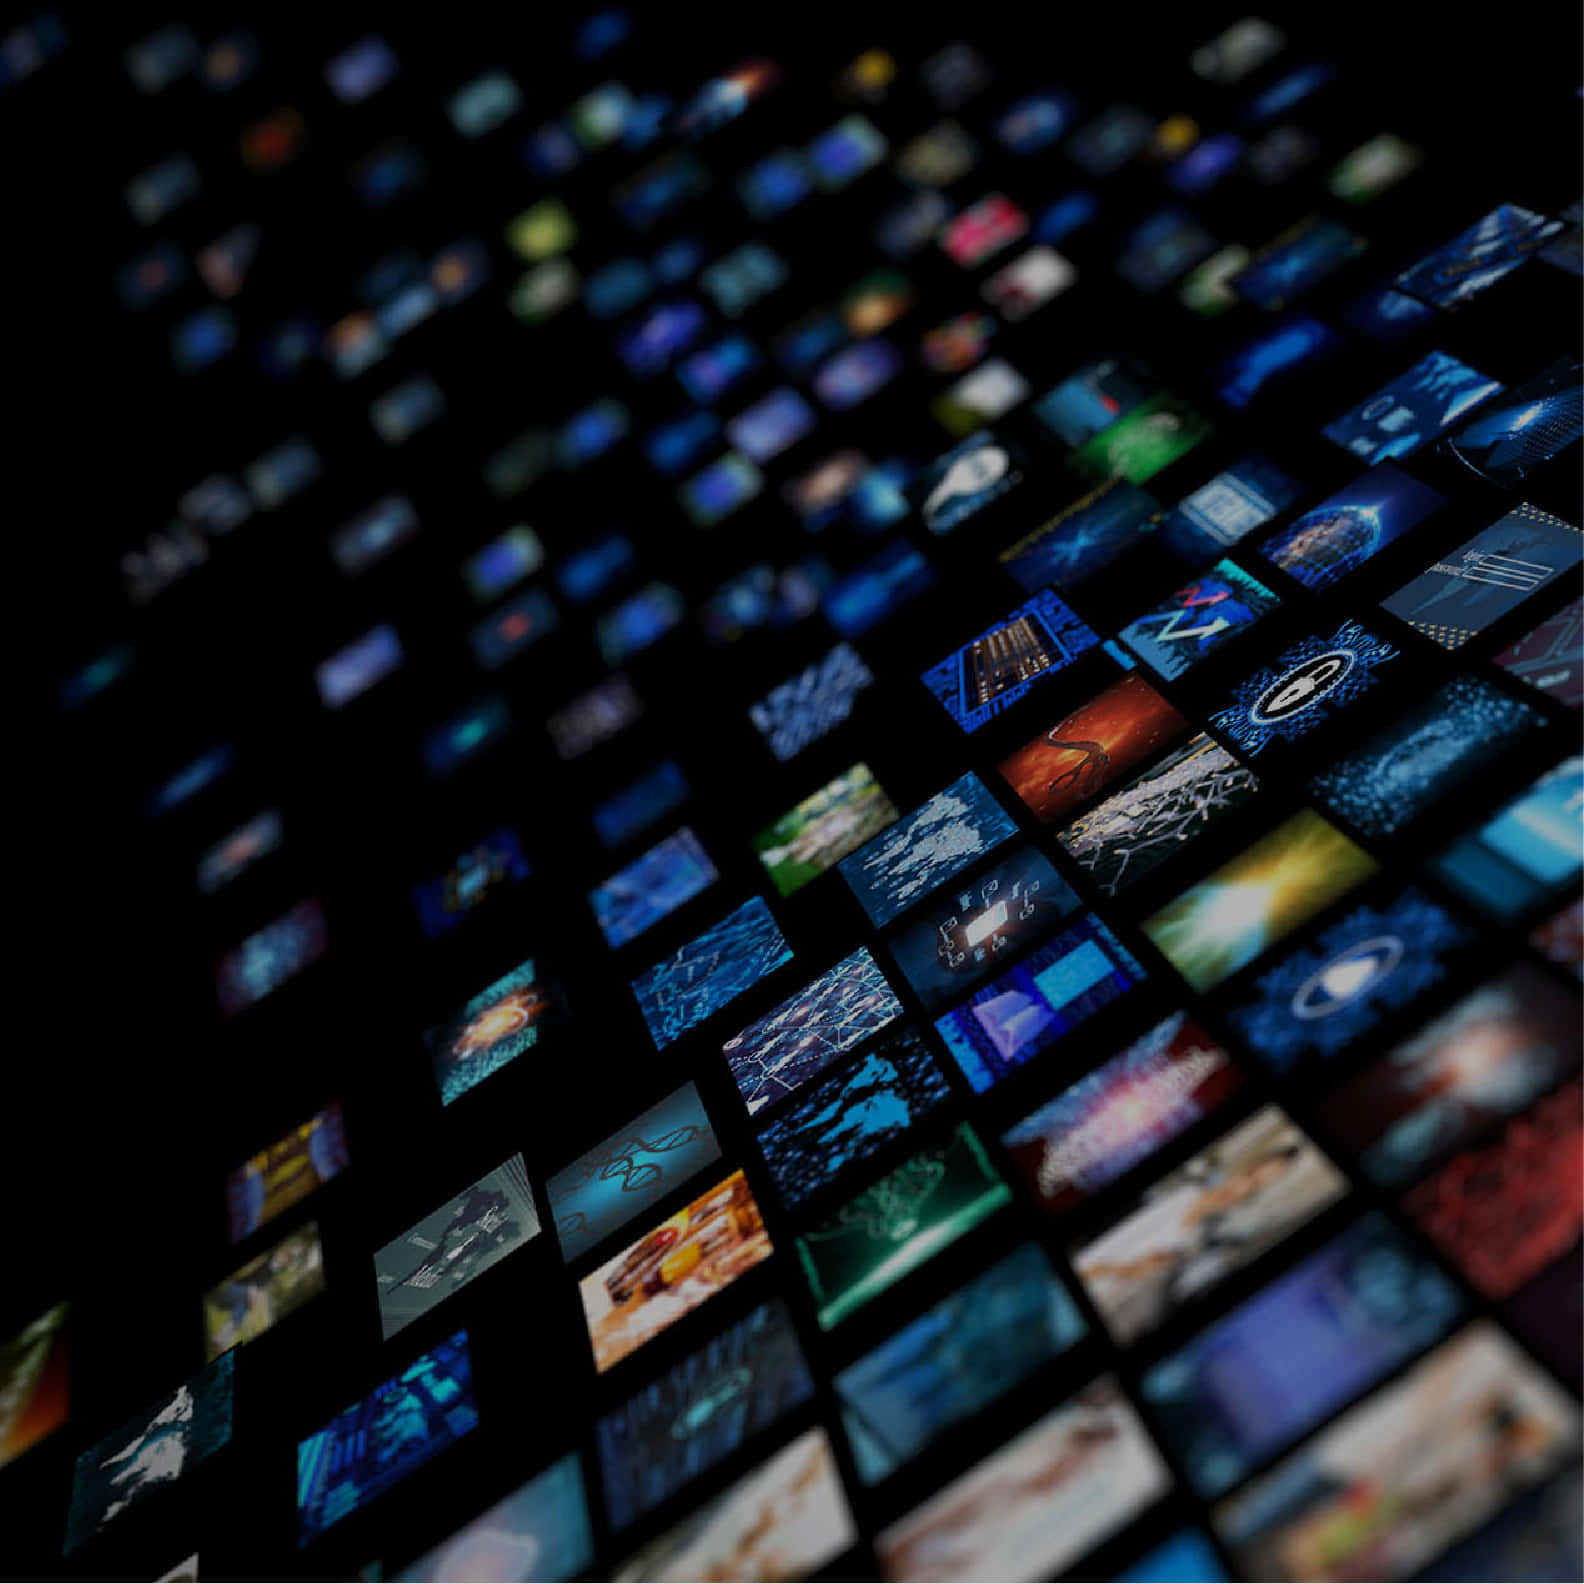 Increase Your Movie-watching Experiences With Streaming Services